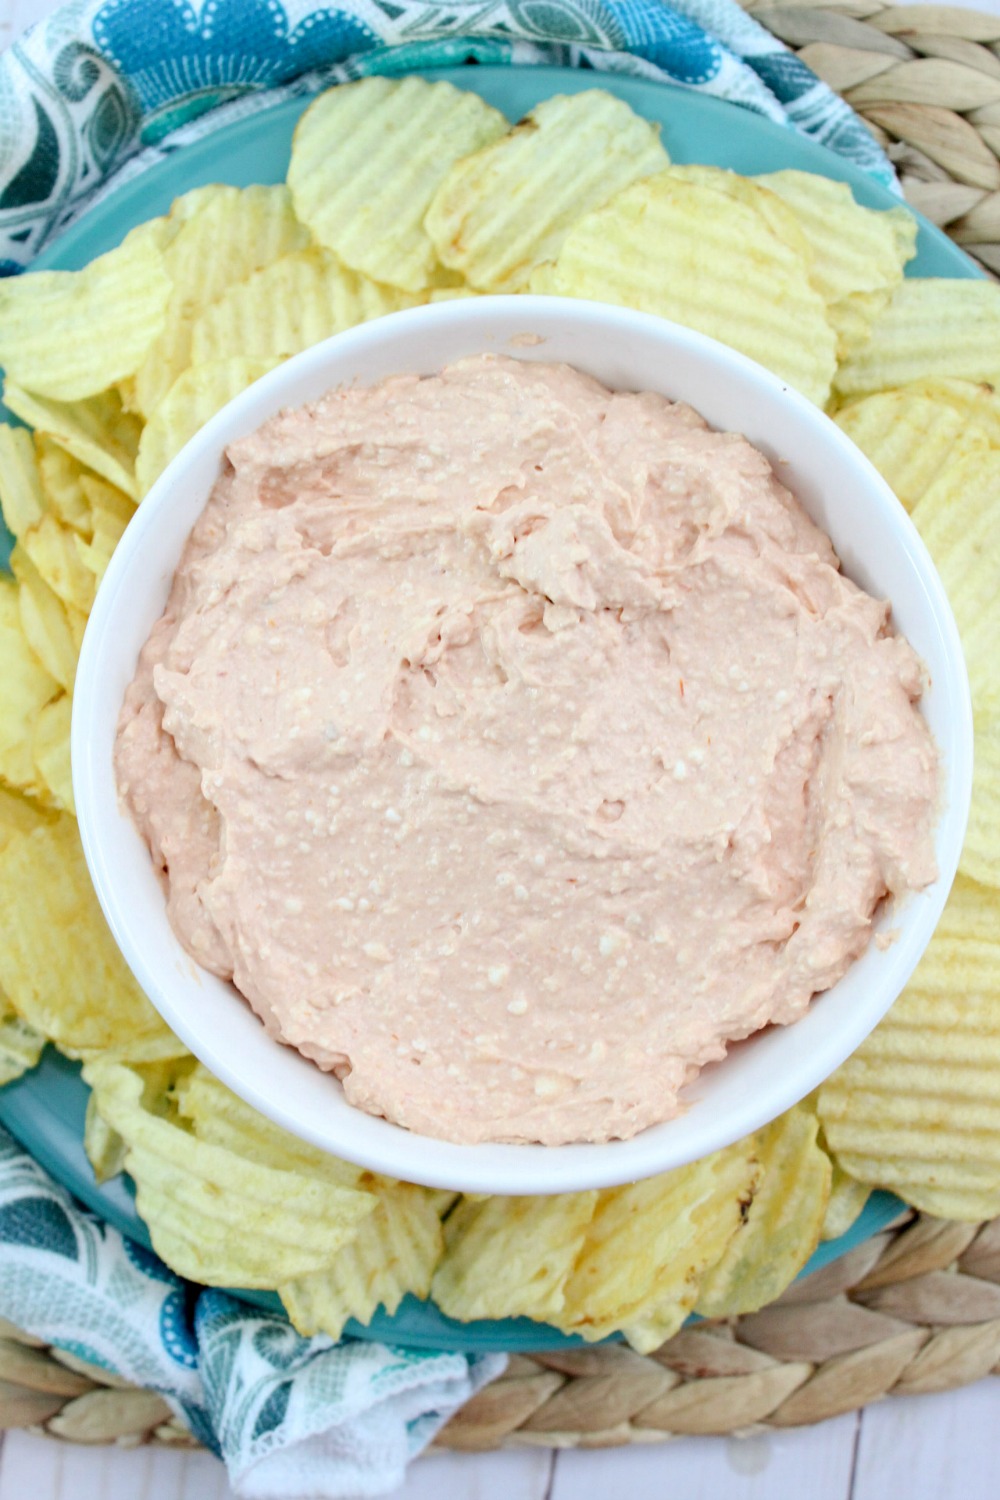 Creamy Chili Dip for Chips